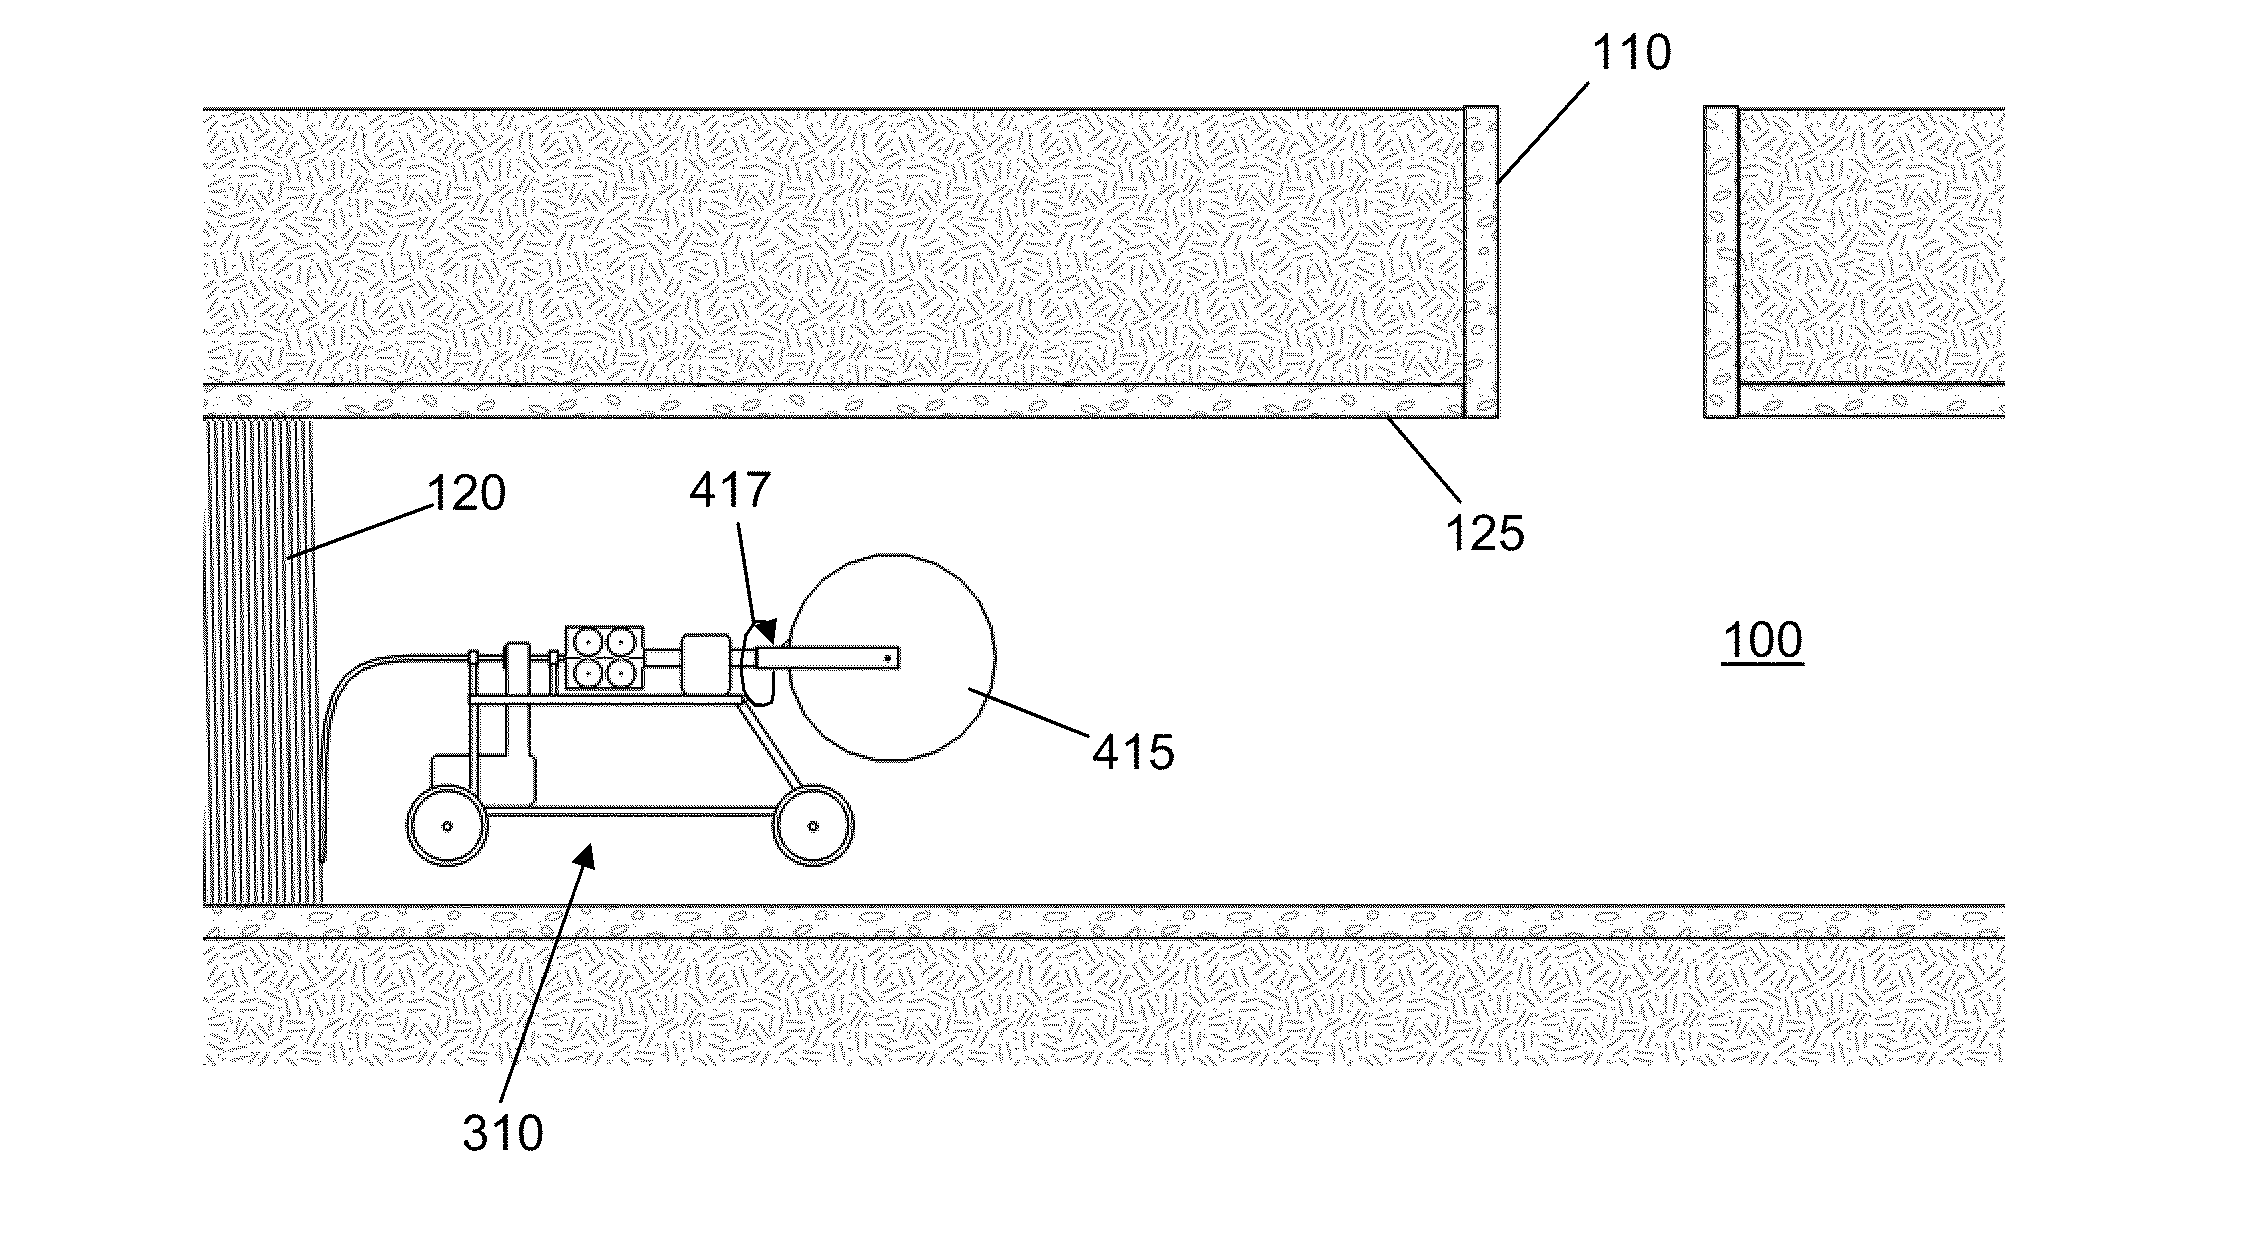 Method for repairing and strengthening pipe with internal helically wound tensile reinforcement